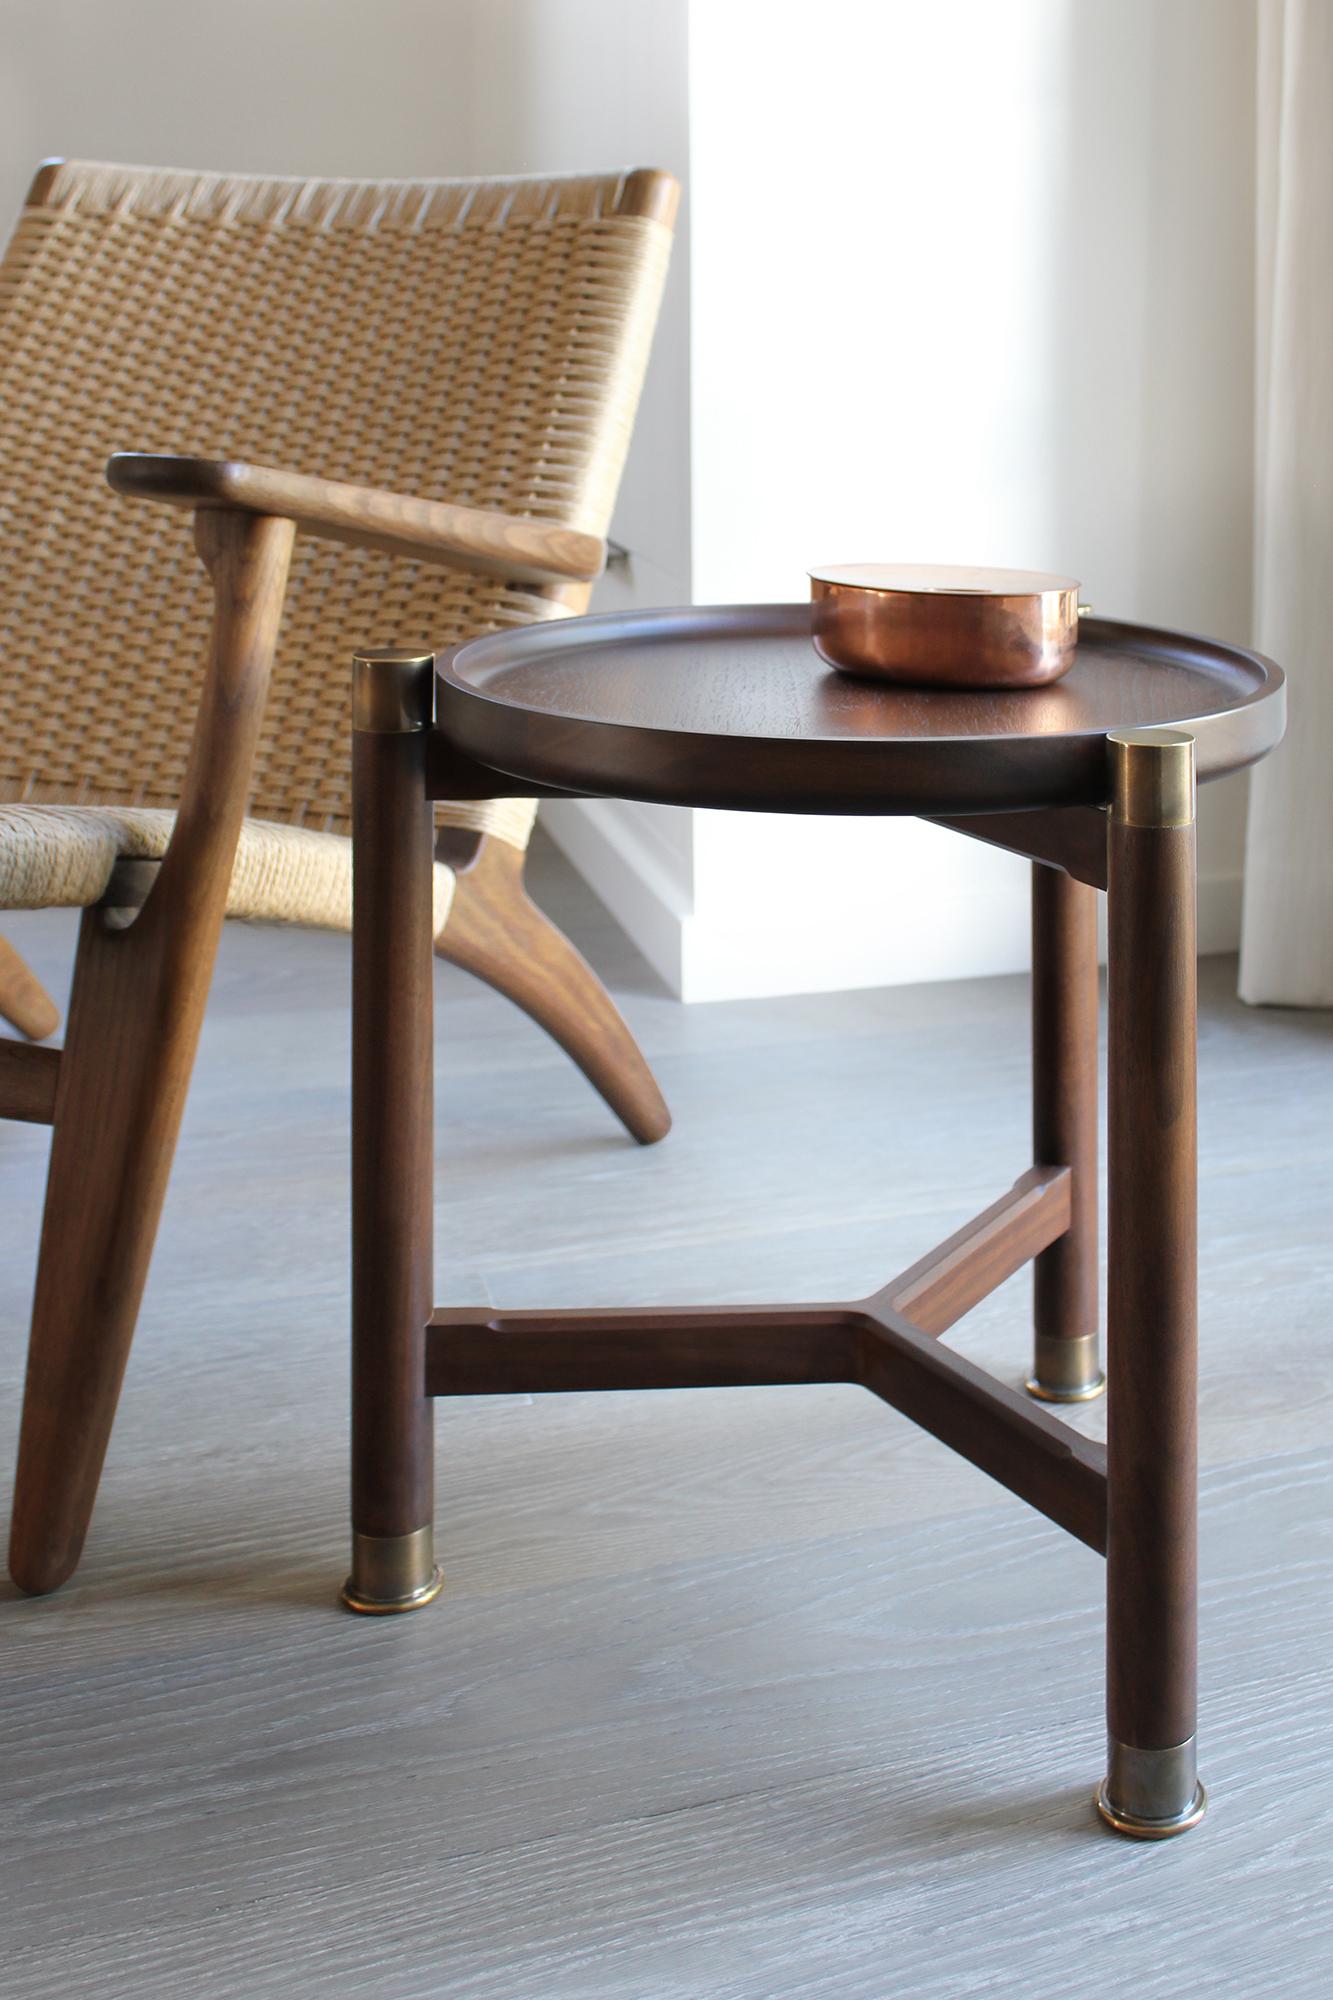 The Otto accent table is a small-scaled table with a Classic, simple, form. 
Available in walnut or oak, it features a round coupe top, substantial antique brass fittings and sleek chamfered stretchers. The epitome of understated elegance - it